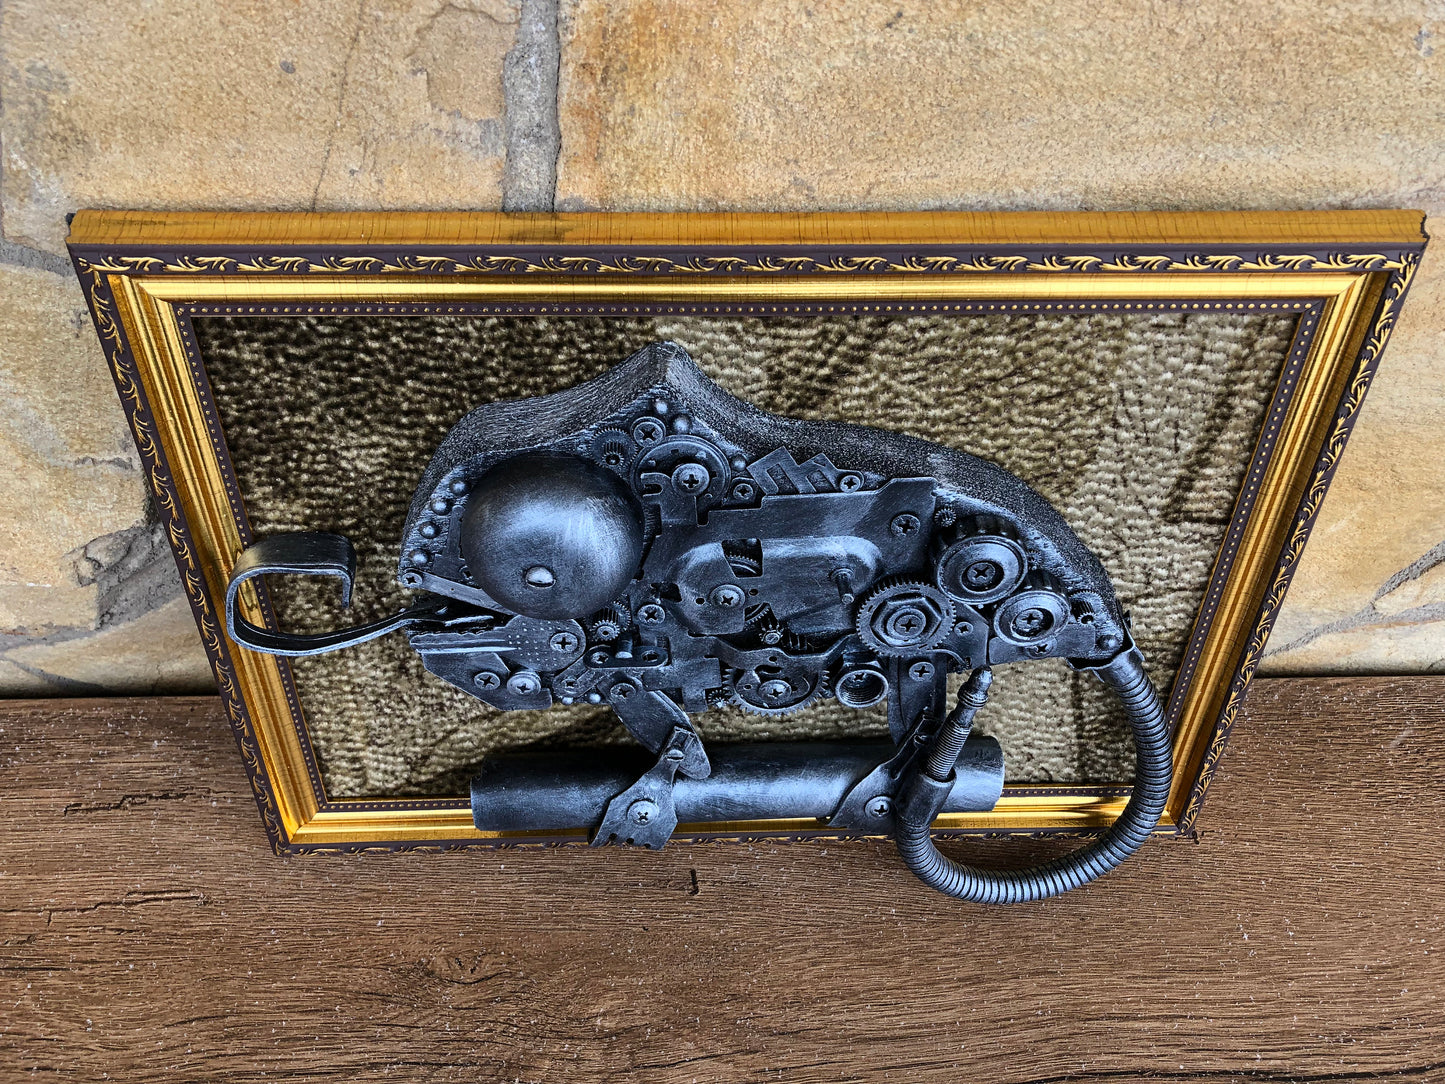 Steampunk painting, steampunk chameleon, steampunk poster, metalic ornament, gears, wall decor, steampunk room decor, junk art,steampunk art